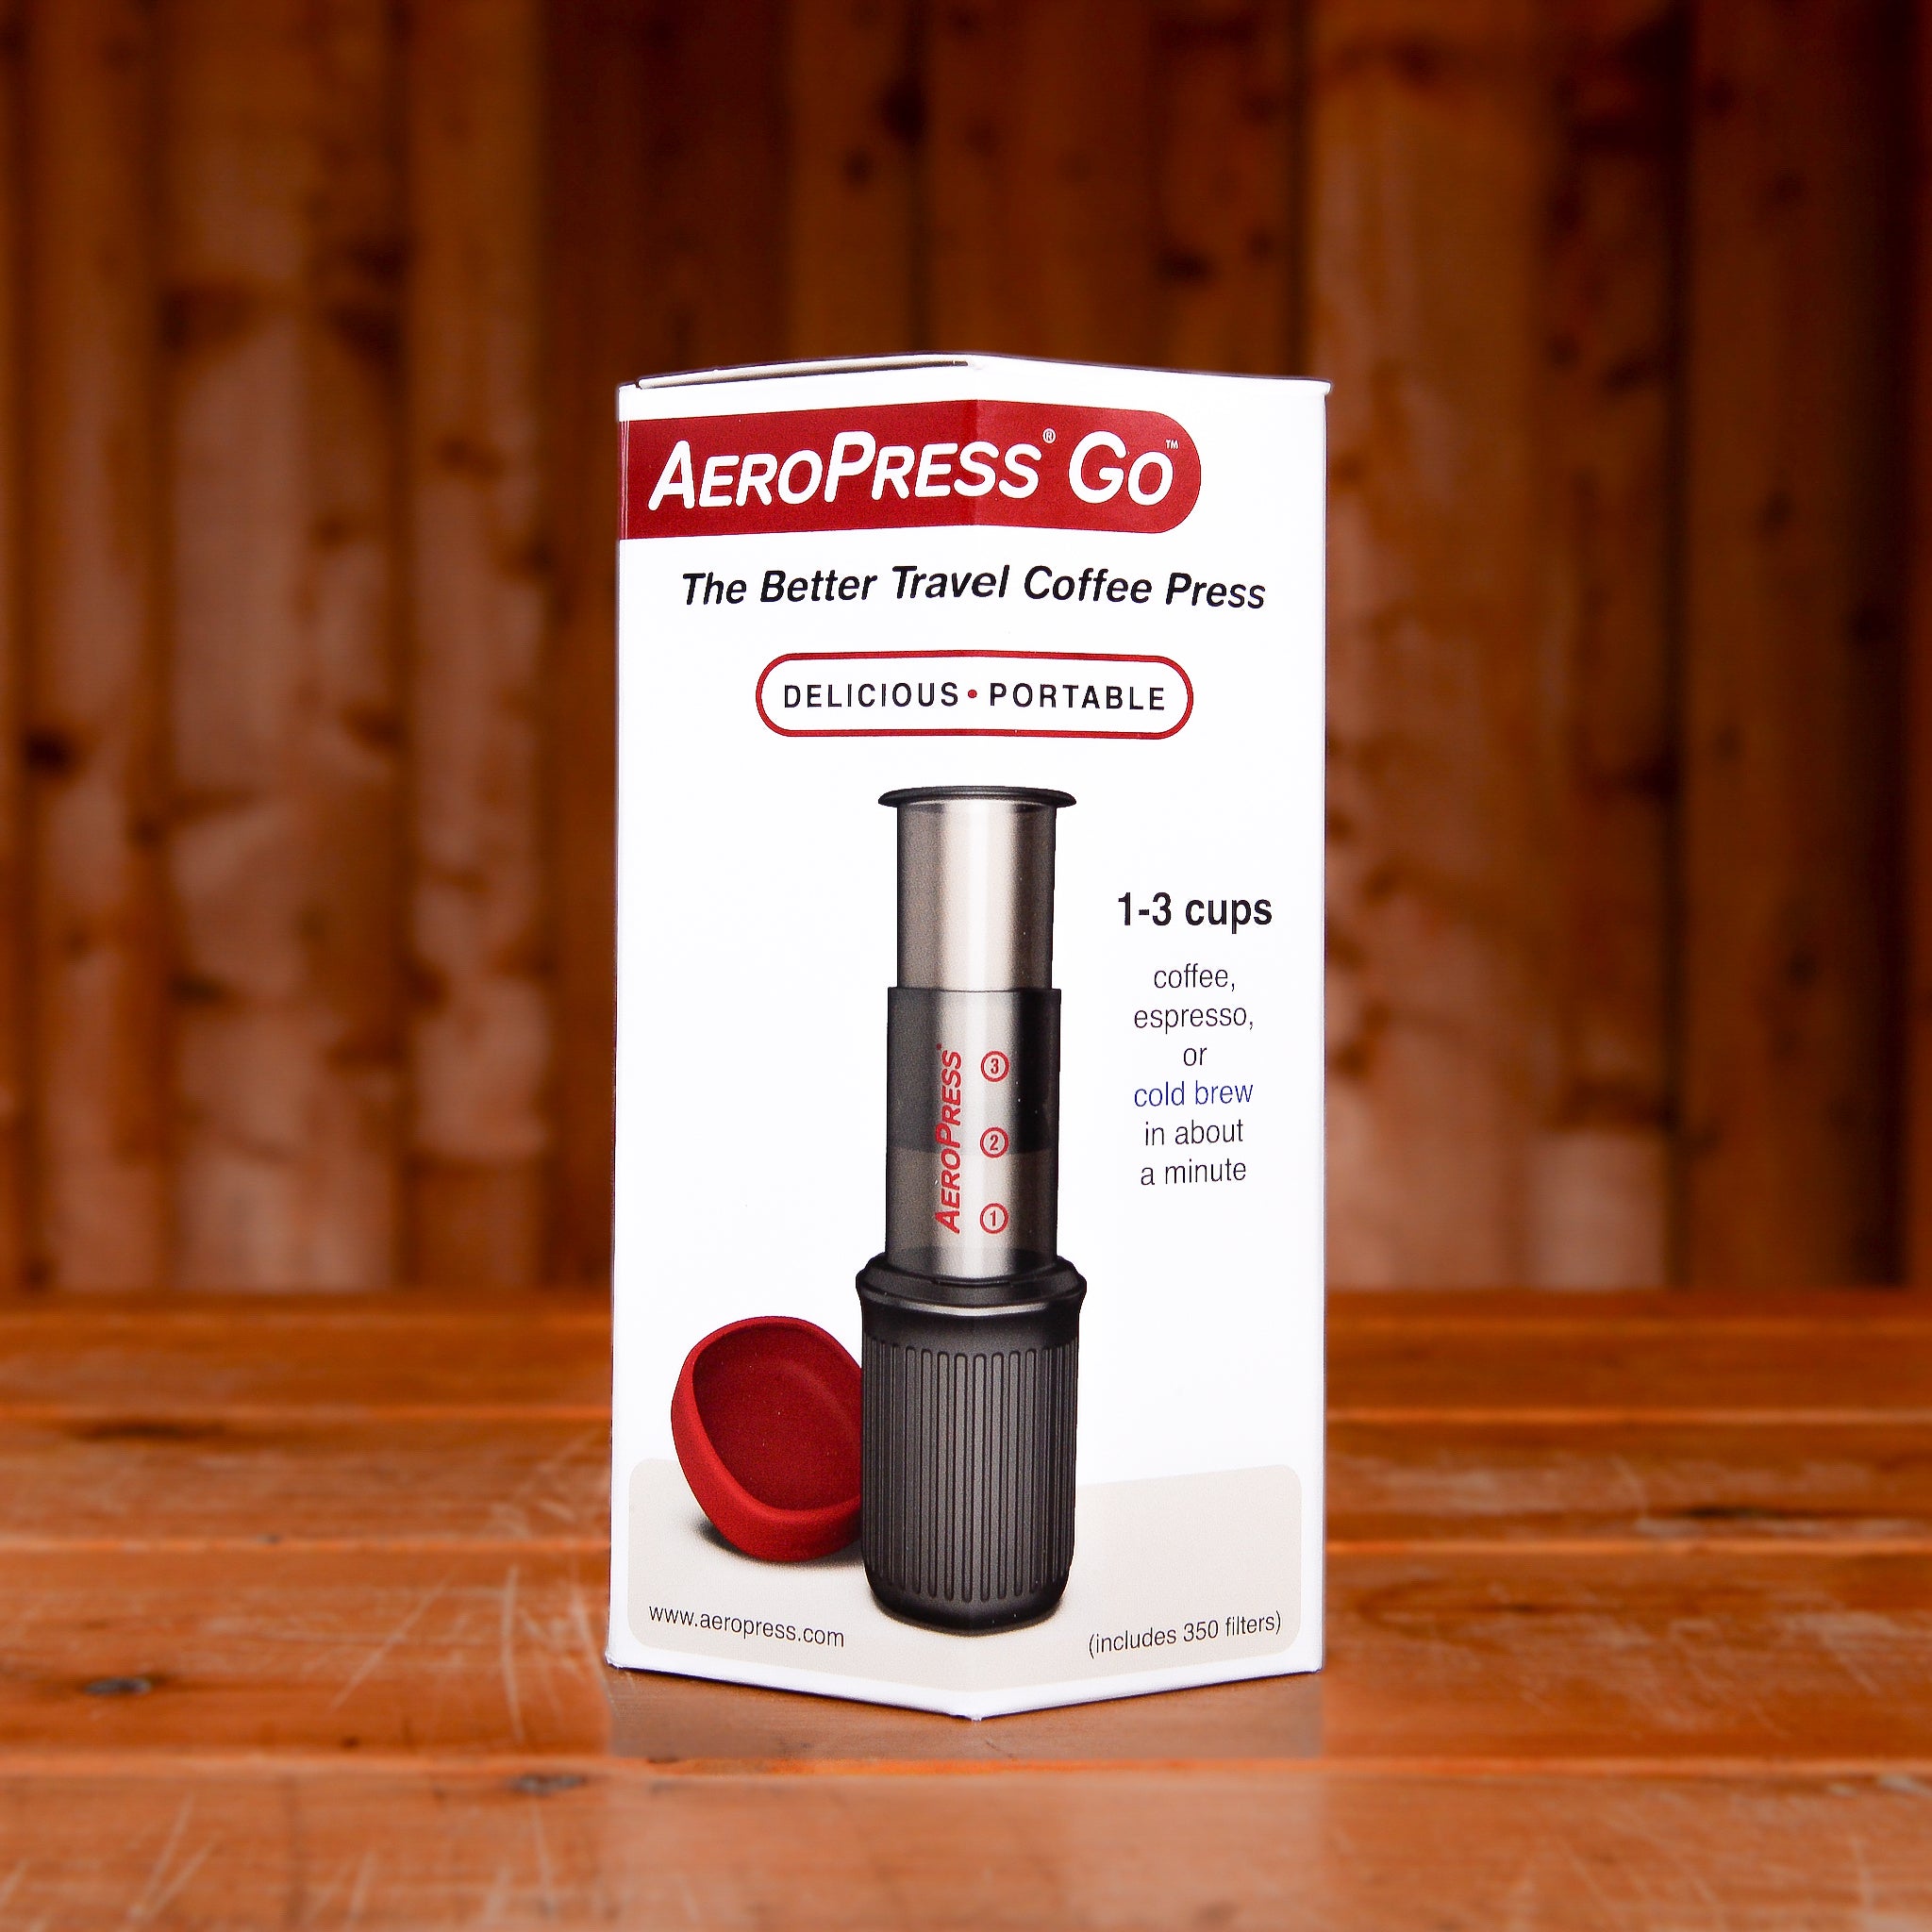 An AeroPress Go speciality coffee brewer in its white box on a wooden table